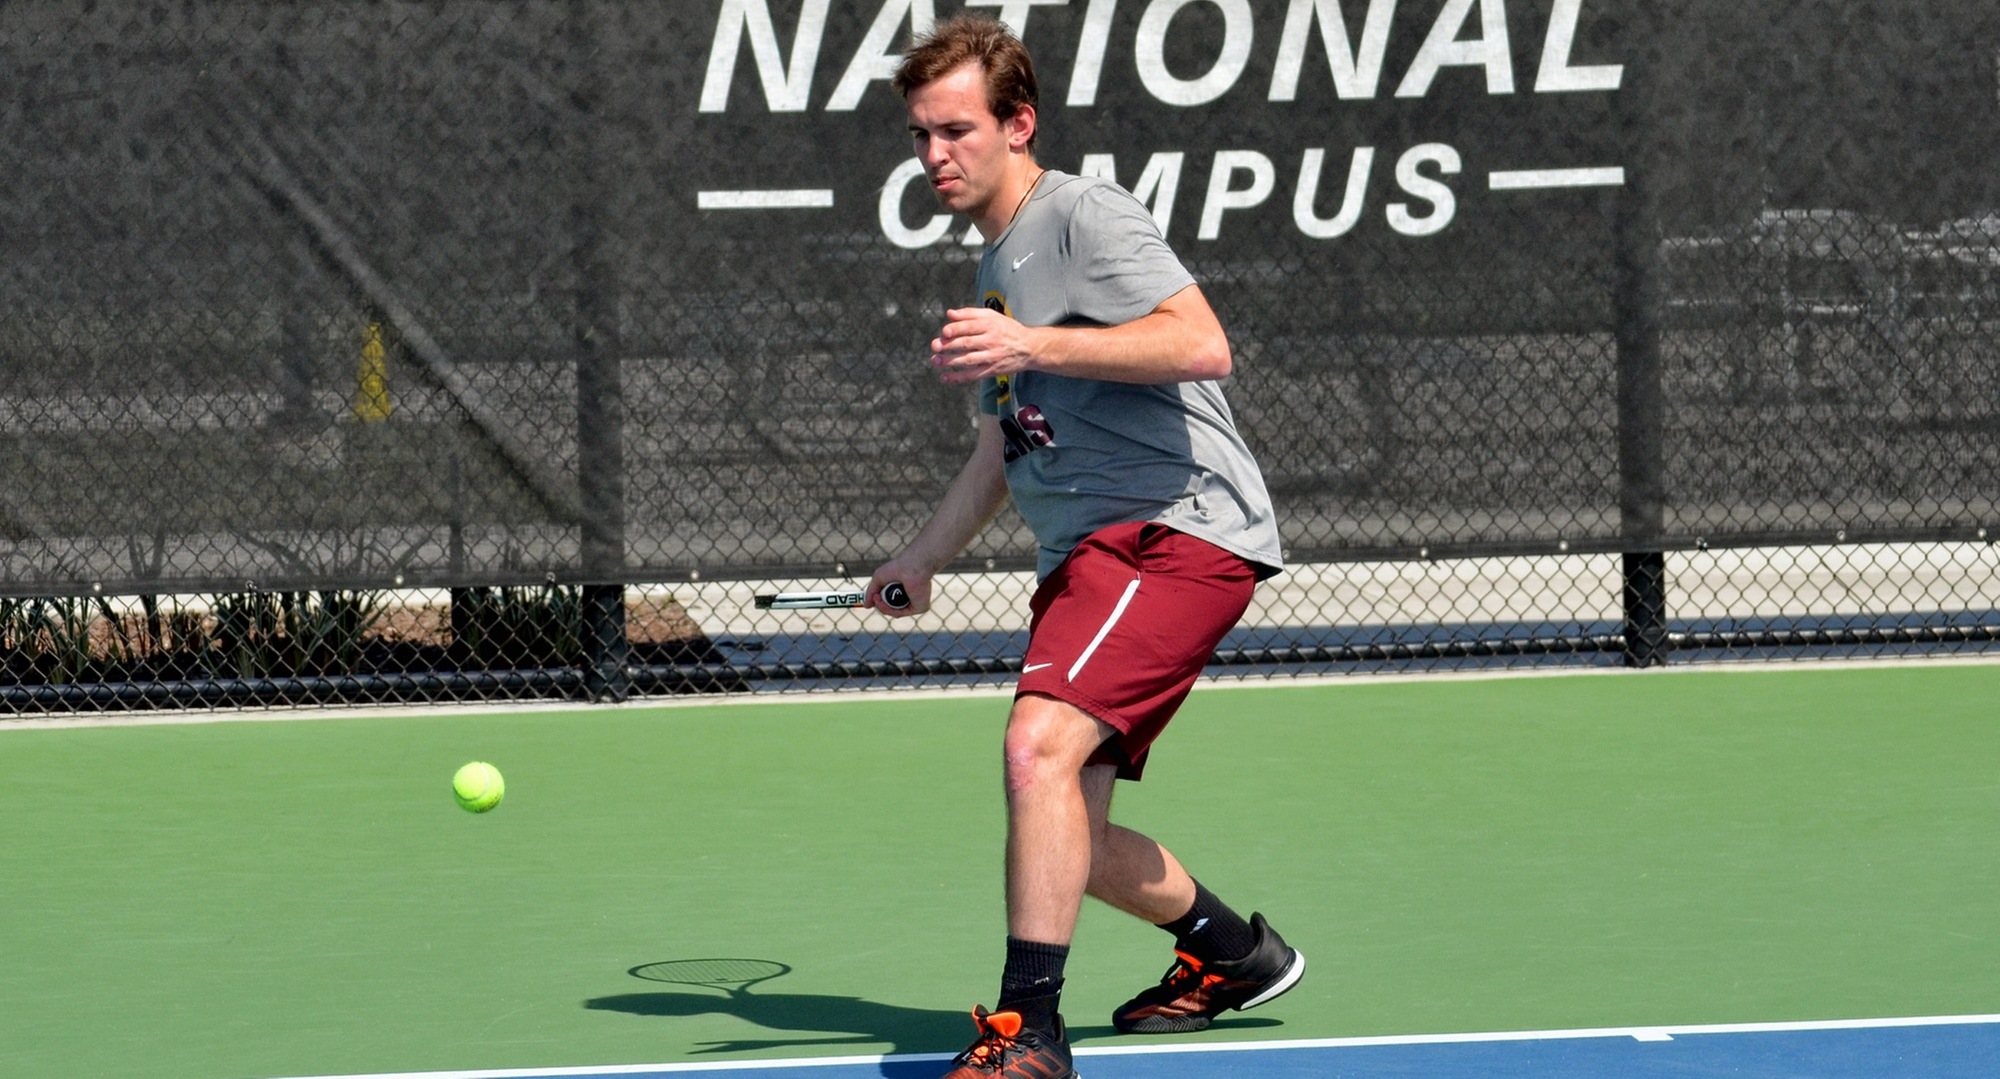 Senior David Youngs lines up a forehand during the team's spring trip to Florida this year. (Pic courtesy of Jeff Meyers)